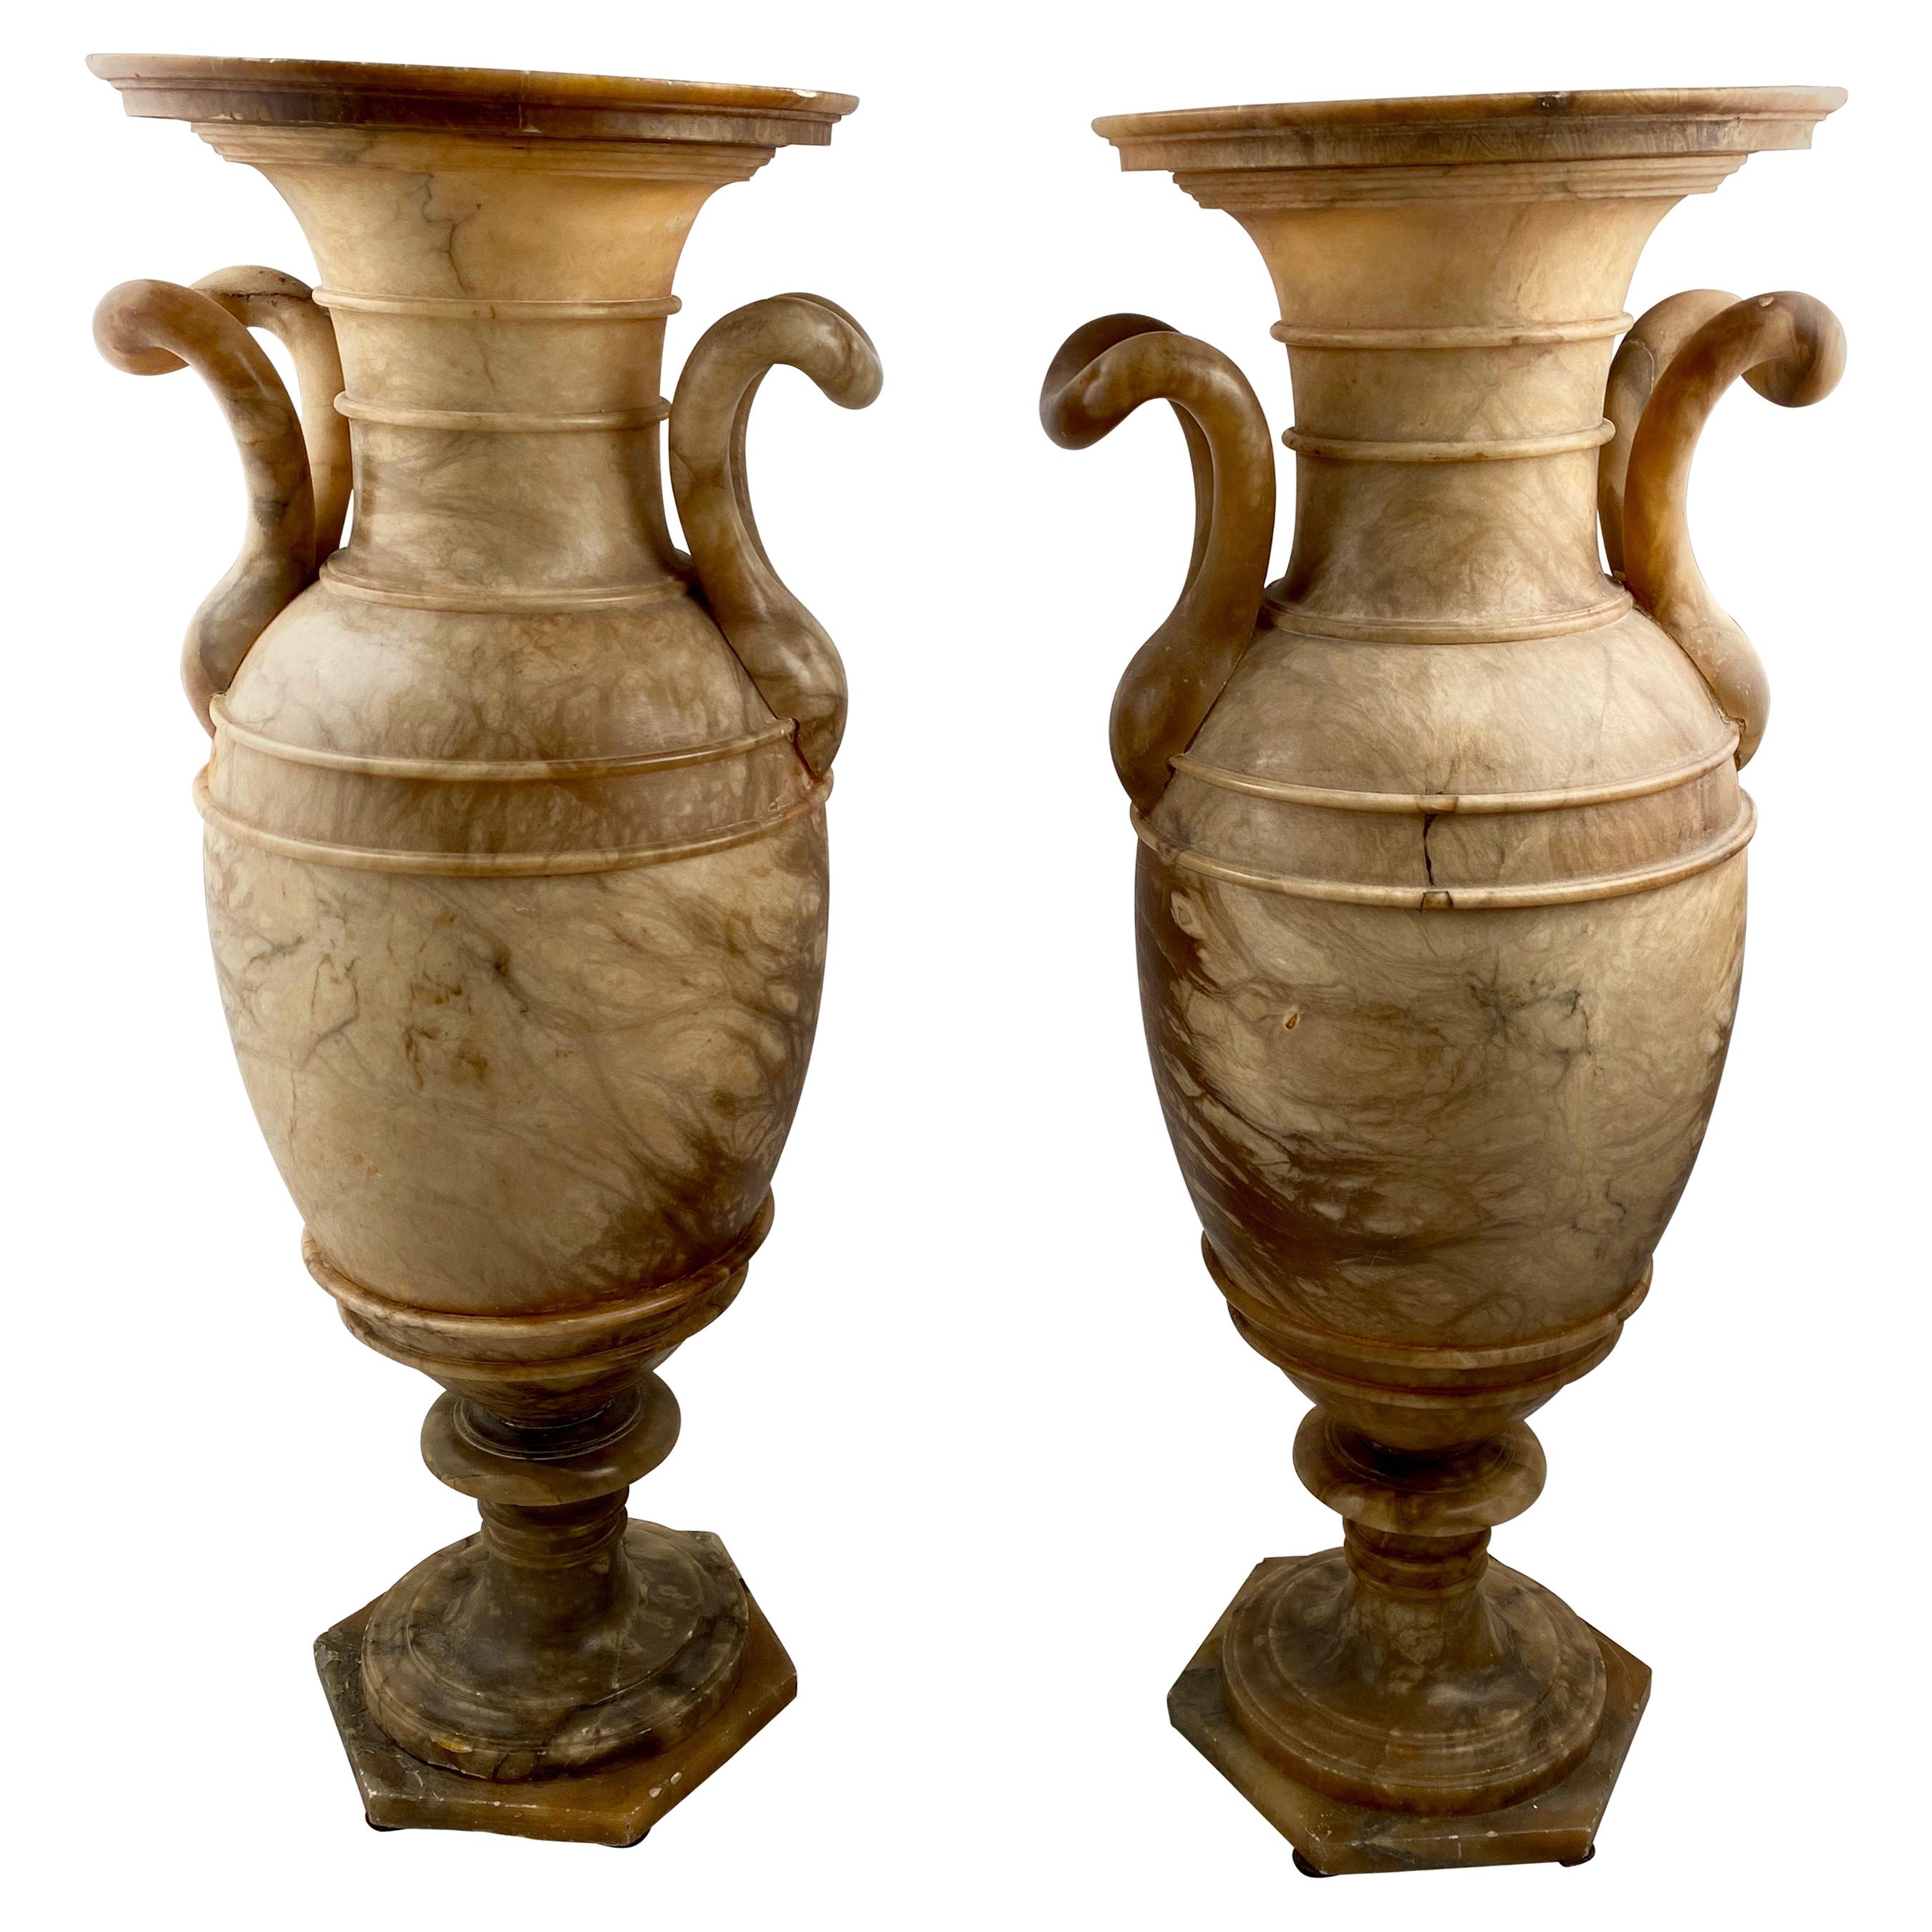 Pair of Alabaster Vases, Early 19th Century